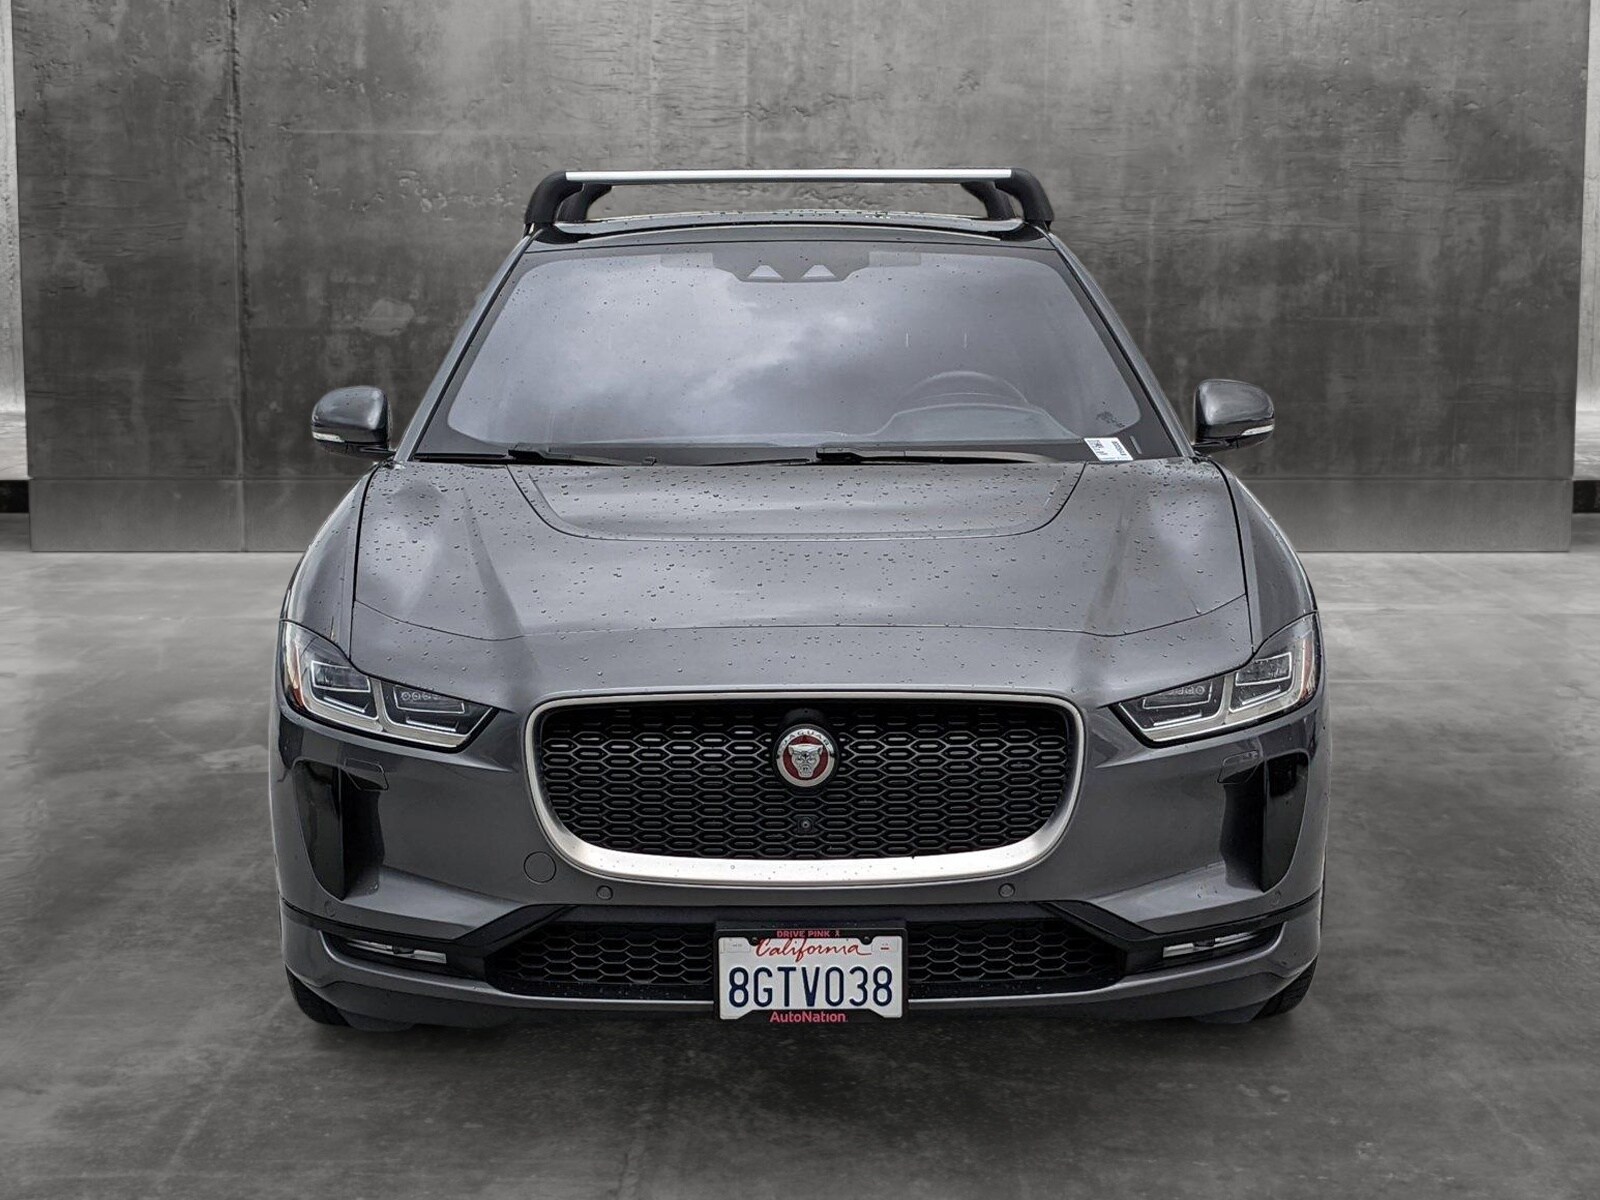 Used 2019 Jaguar I-PACE First Edition with VIN SADHD2S14K1F63338 for sale in Fremont, CA